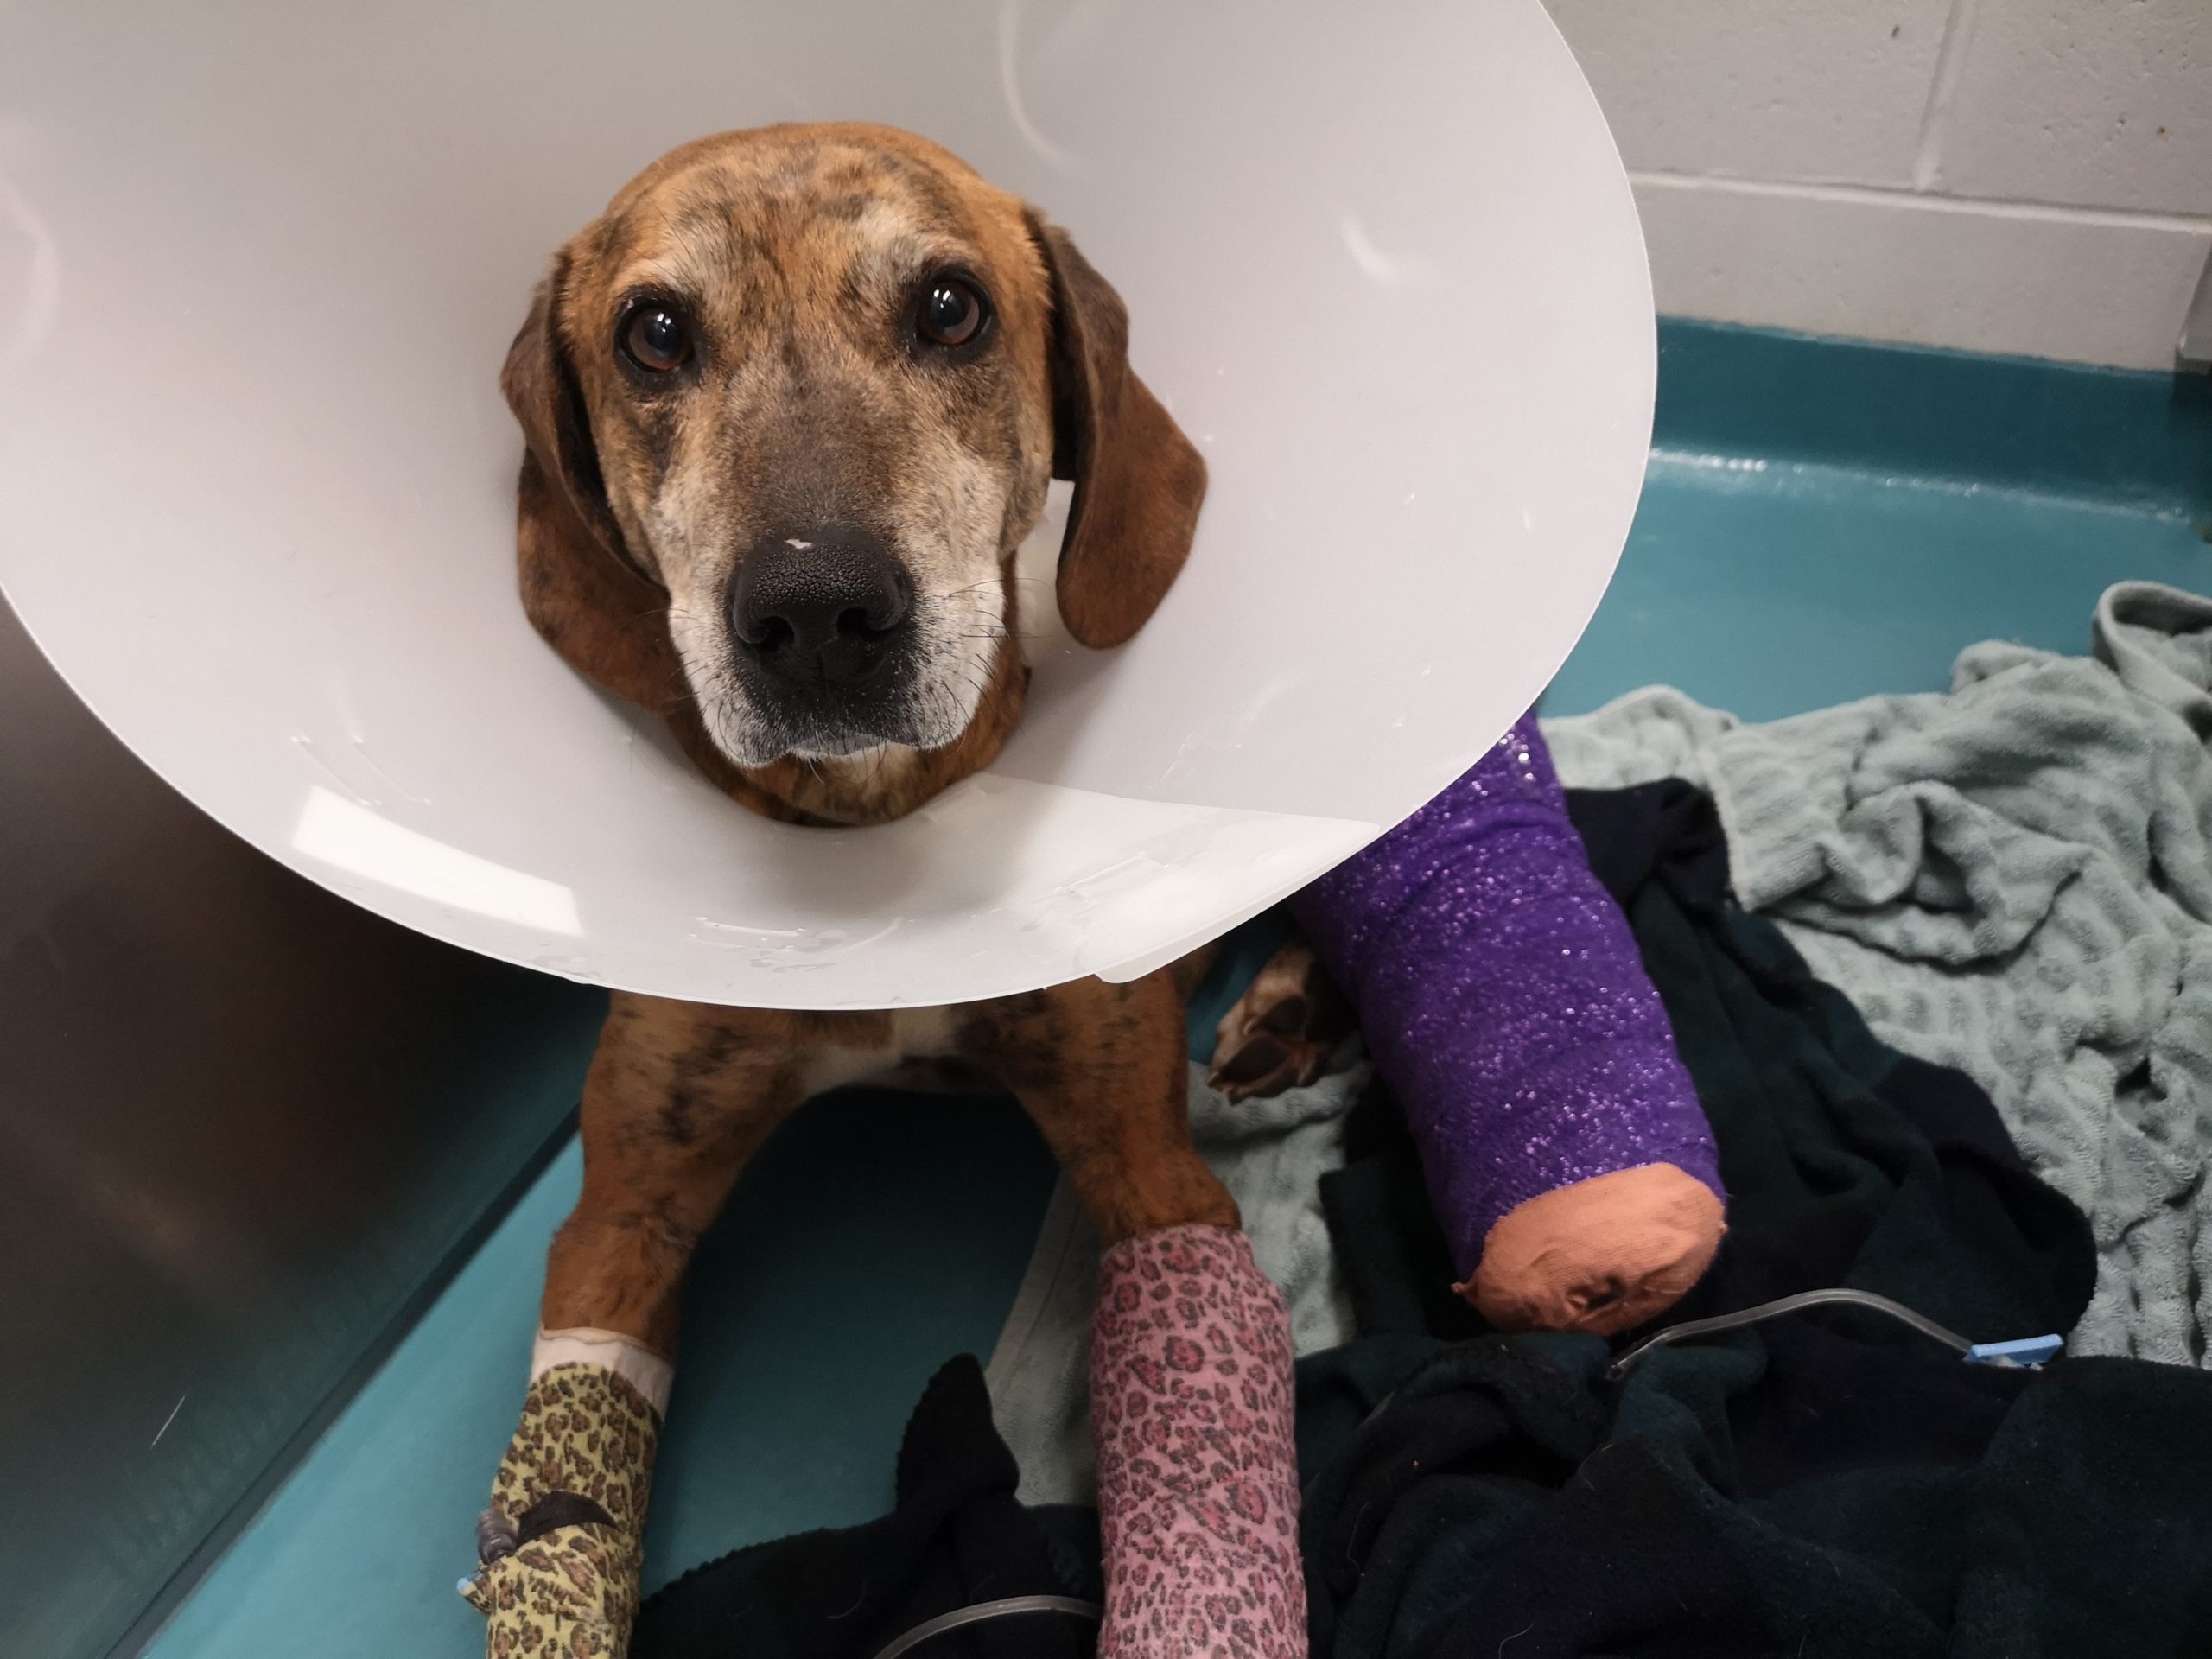 local humane society looking for owner of injured dog scaled